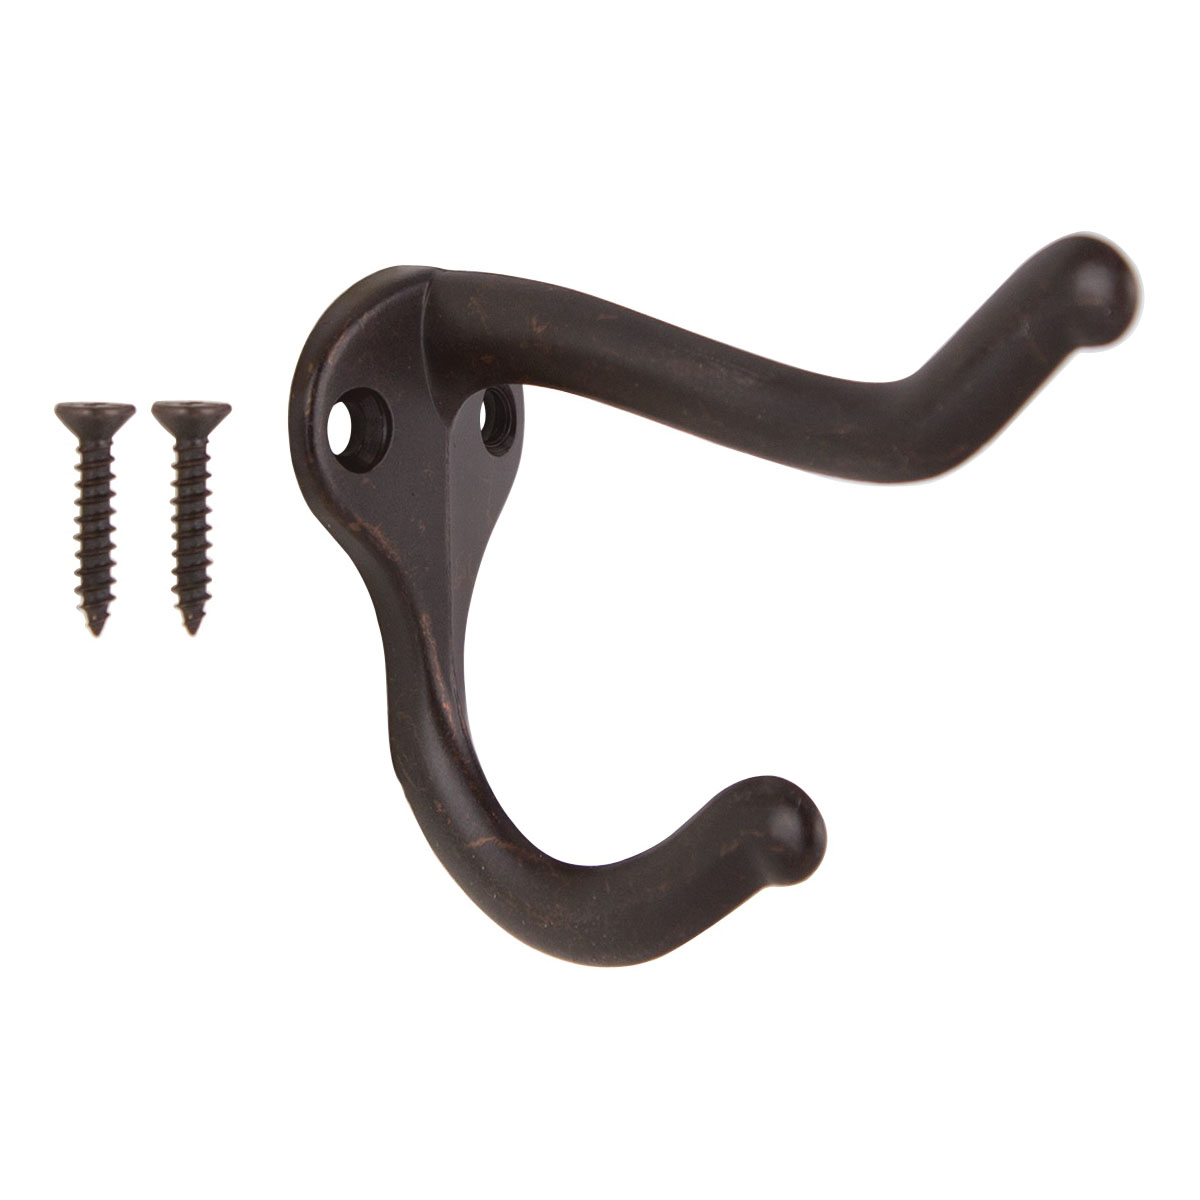 H62-B076 Coat and Hat Hook, 22 lb, 2-Hook, 1 in Opening, Zinc, Oil-Rubbed Bronze